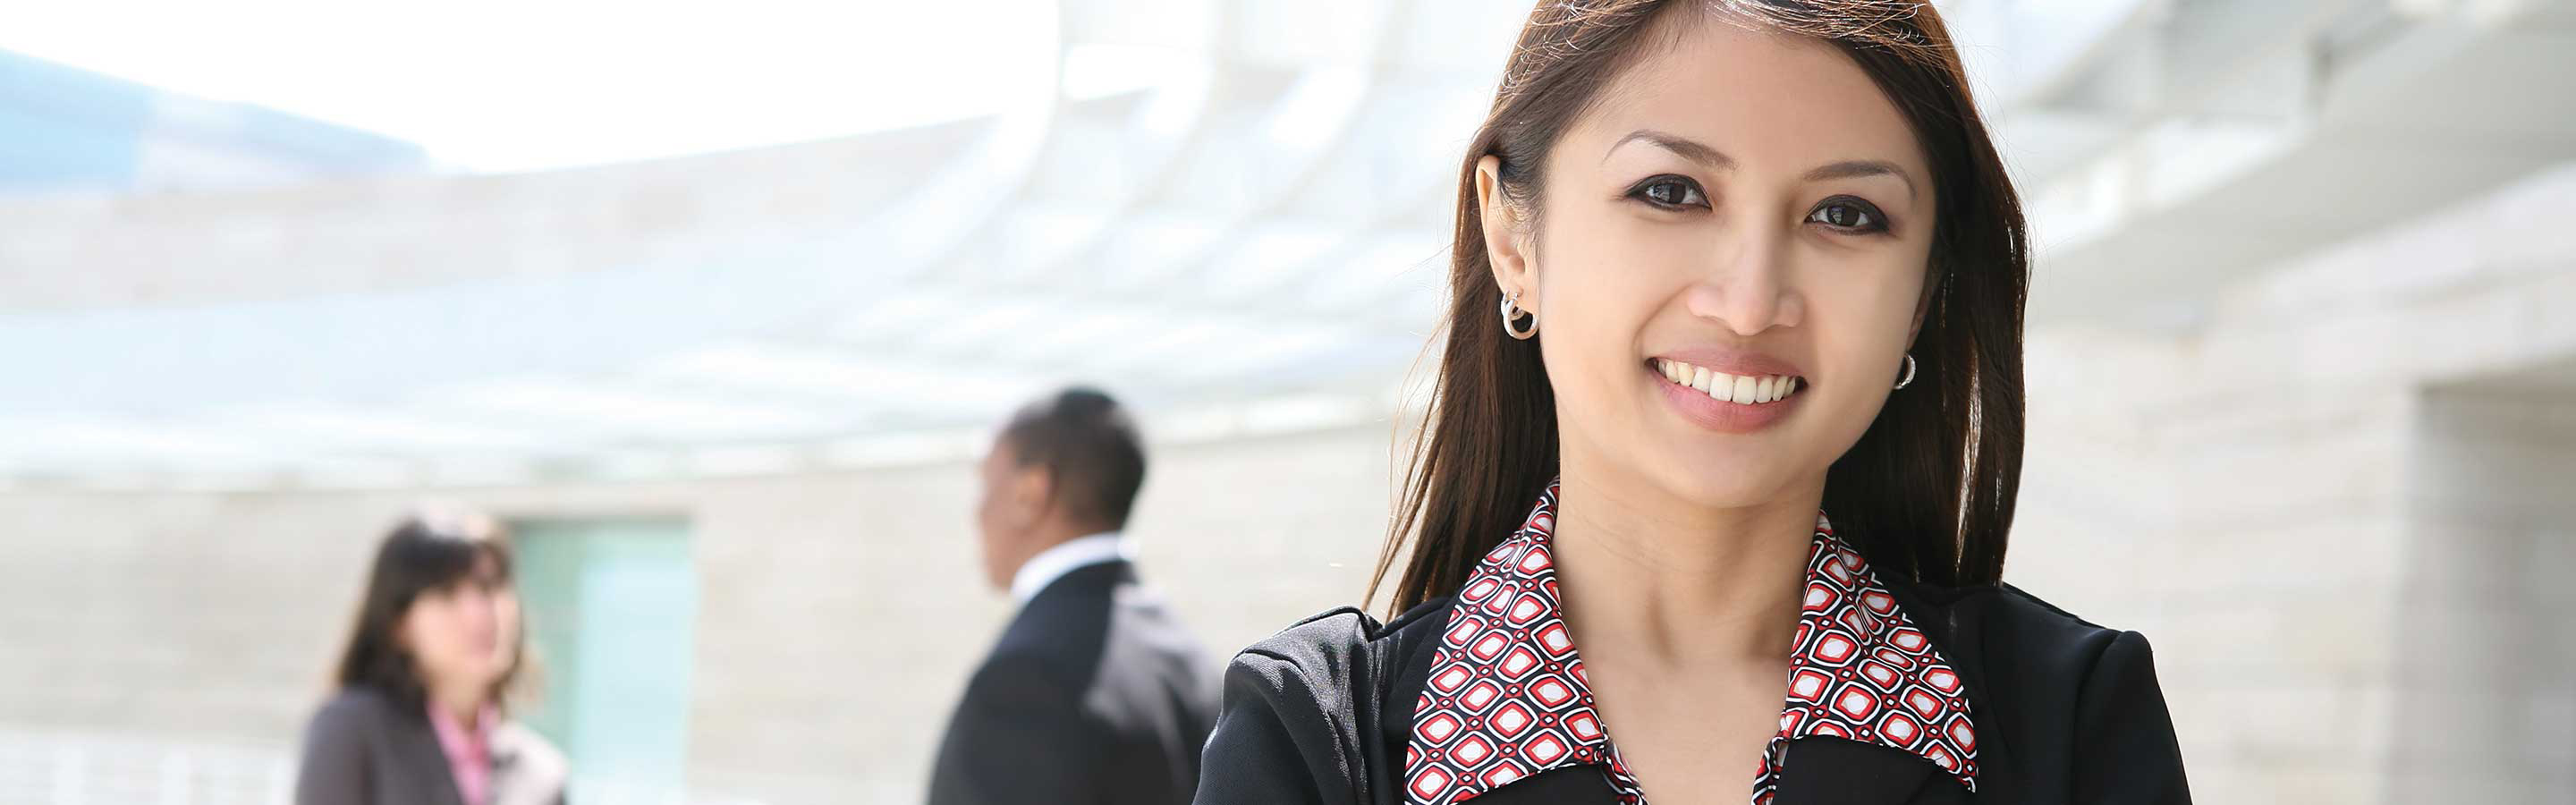 woman dressed in business attire smiling at the camera